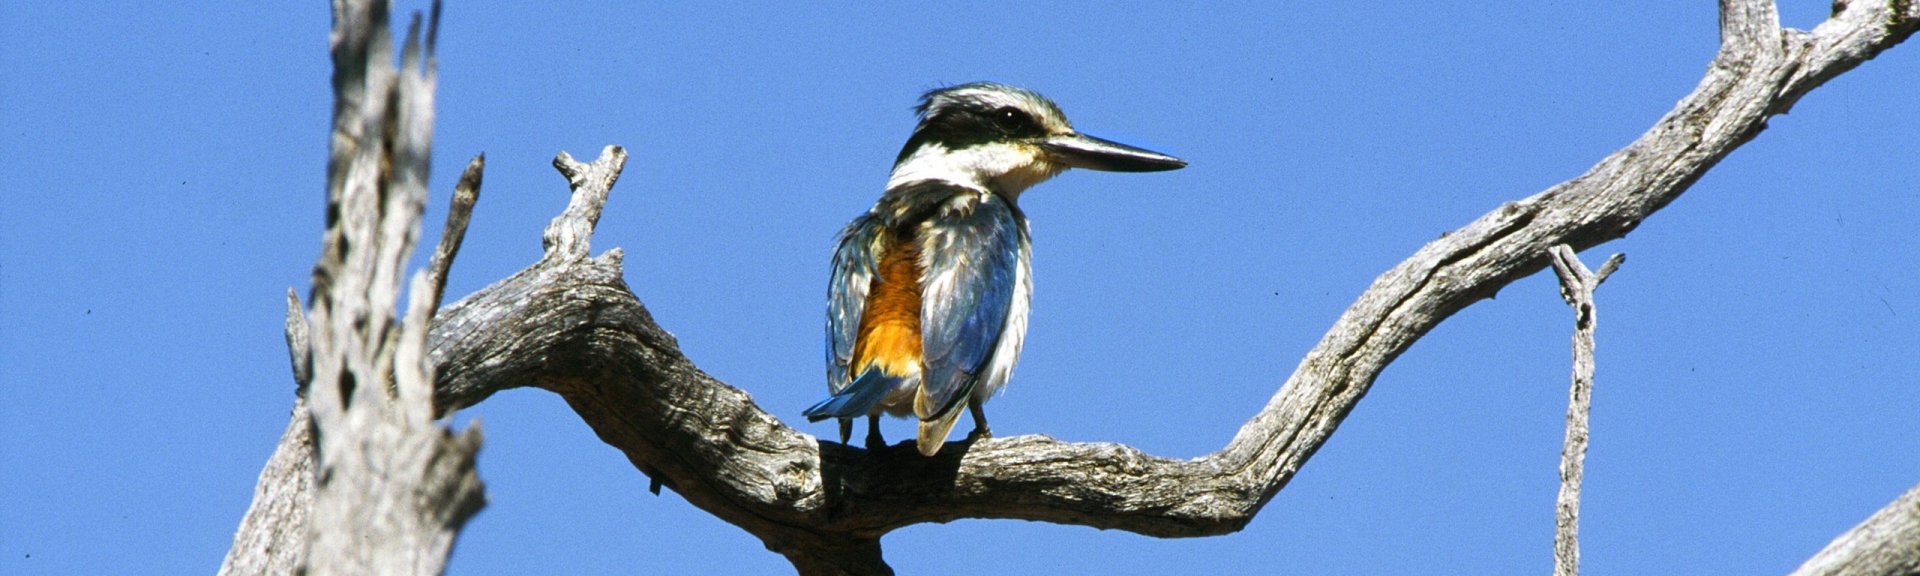 Red-backed kingfisher. Photo: Brian Furby